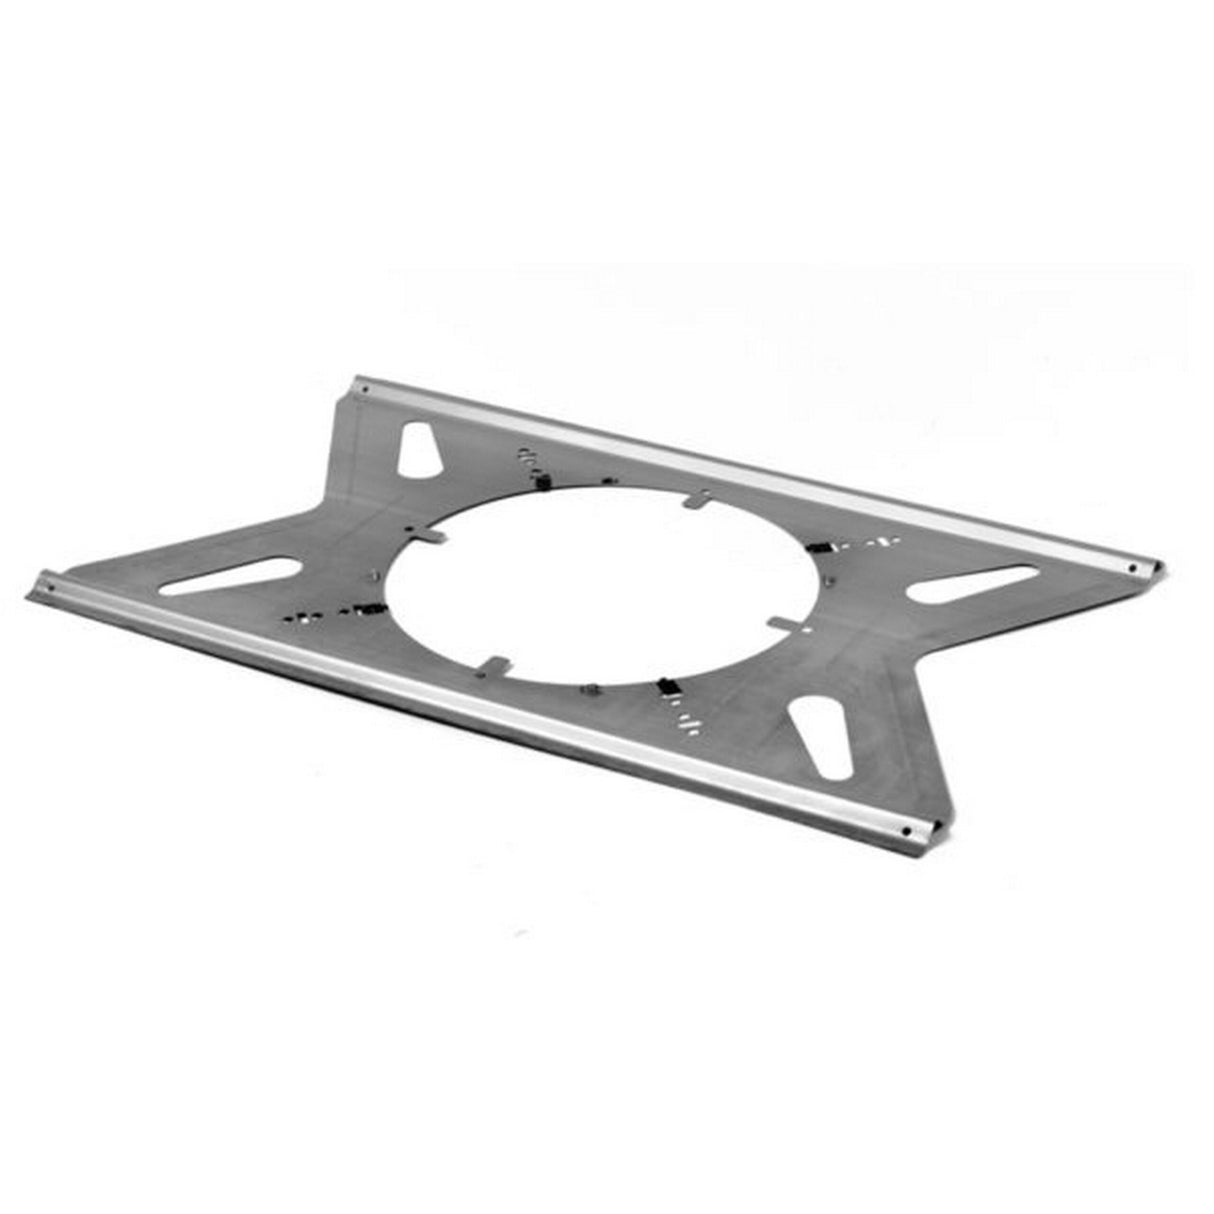 Lowell LBS8-R1 Round Opening Tile Bridge for 8-Inch Speaker